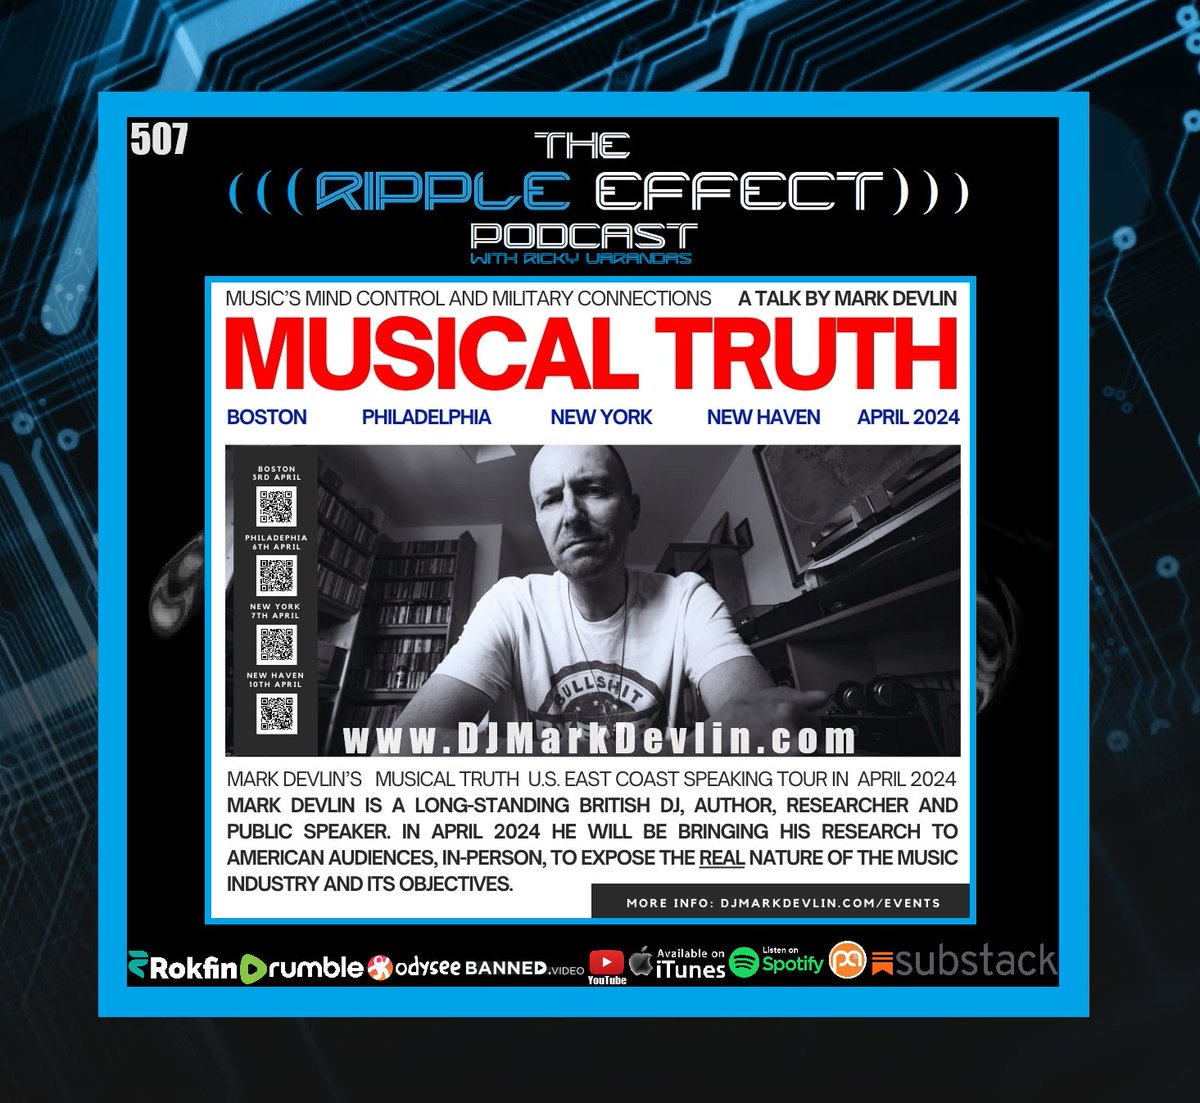 NEW #TheRippleEffectPodcast (@DJMarkDevlin | Music's Mind Control, Secrets & Conspiracies) WATCH: odysee.com/@therippleeffe… LISTEN: open.spotify.com/episode/4MY22a…